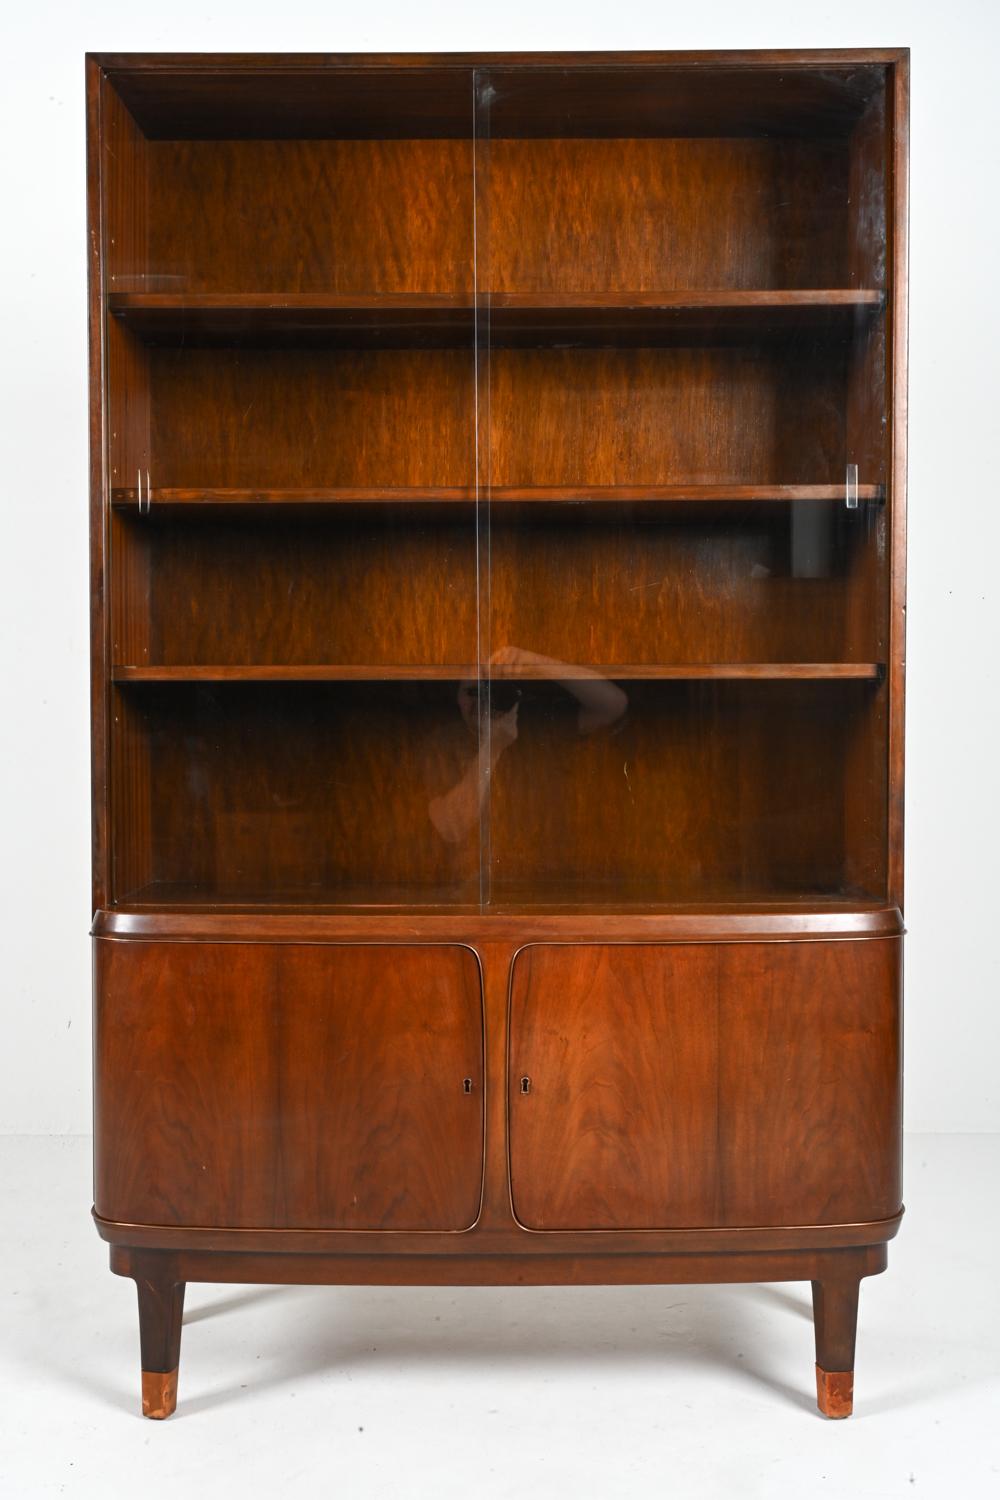 20th Century Danish Art Deco Glass-Front Bookcase or Display Cabinet by Georg Kofoed For Sale